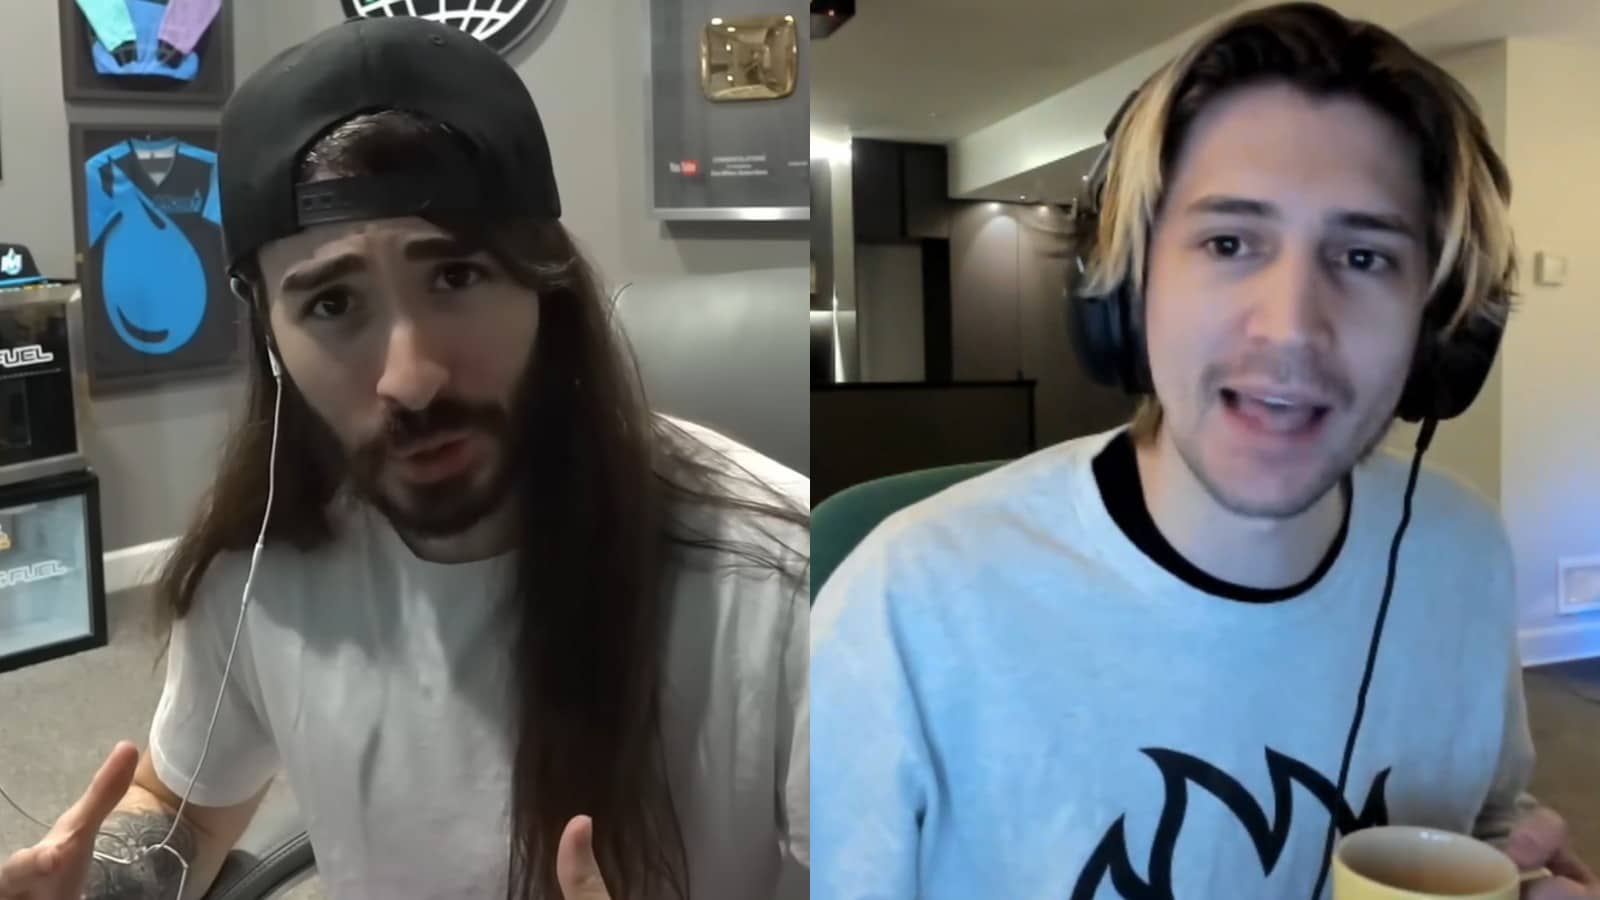 MoistCr1TiKaL talking in YouTube video and xQc streaming on Twitch